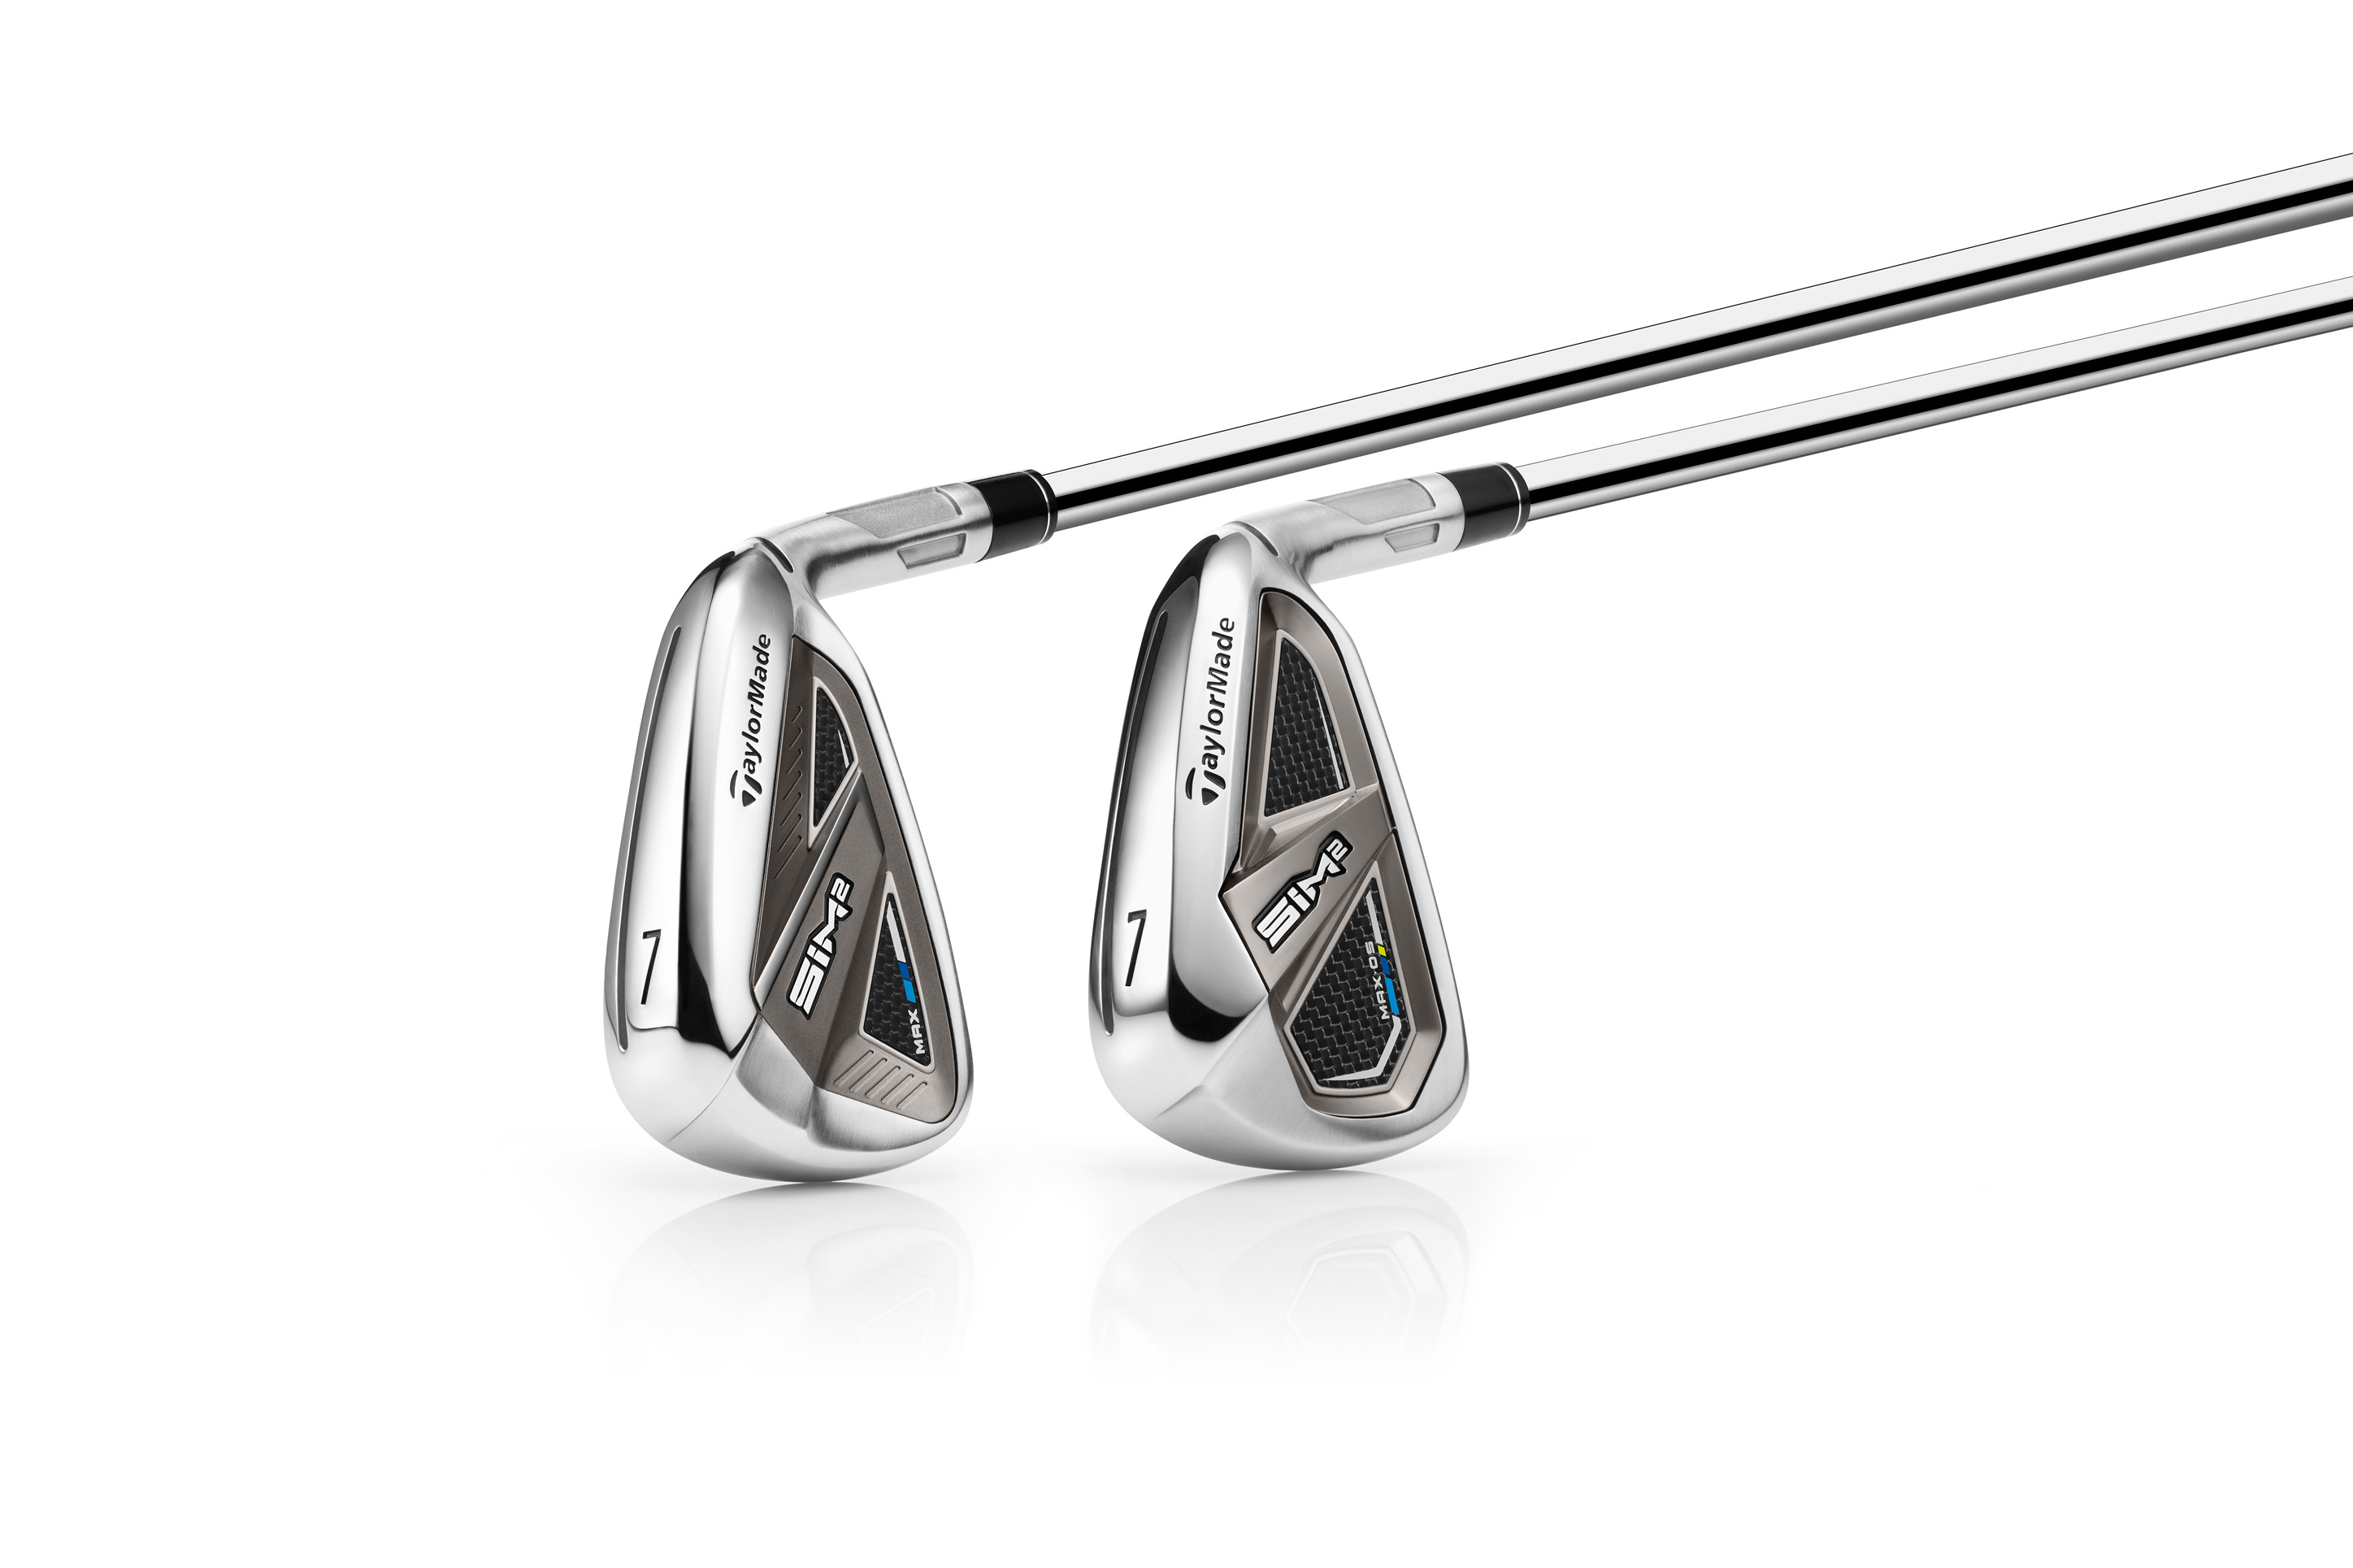 TaylorMade's SIM2 Max and Max OS irons have “advantages a cavity